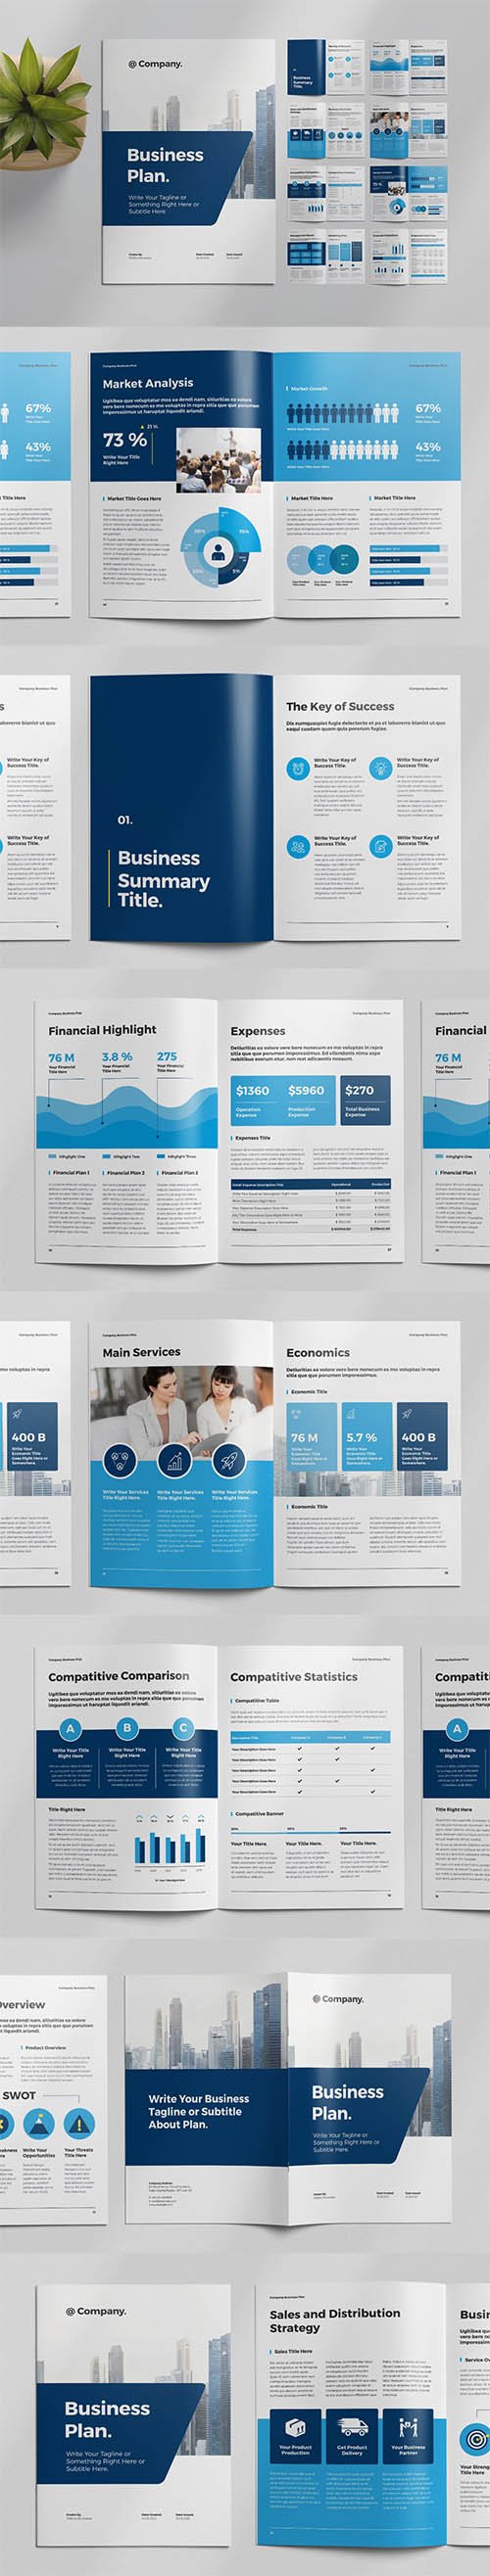 Business Plan Layout with Blue Accents